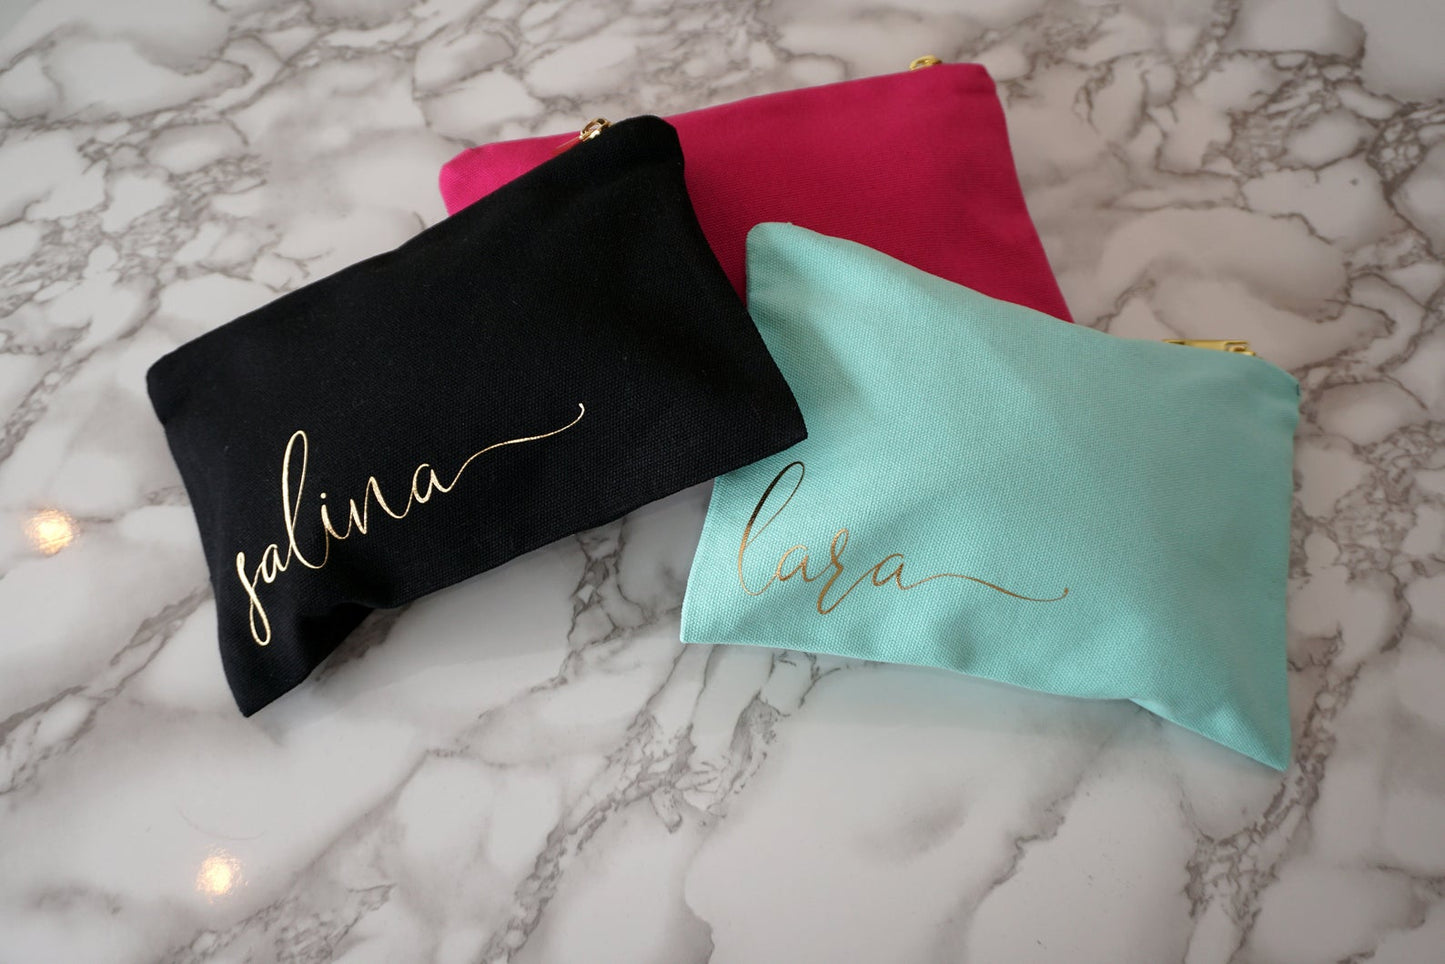 Personalized Makeup Bags